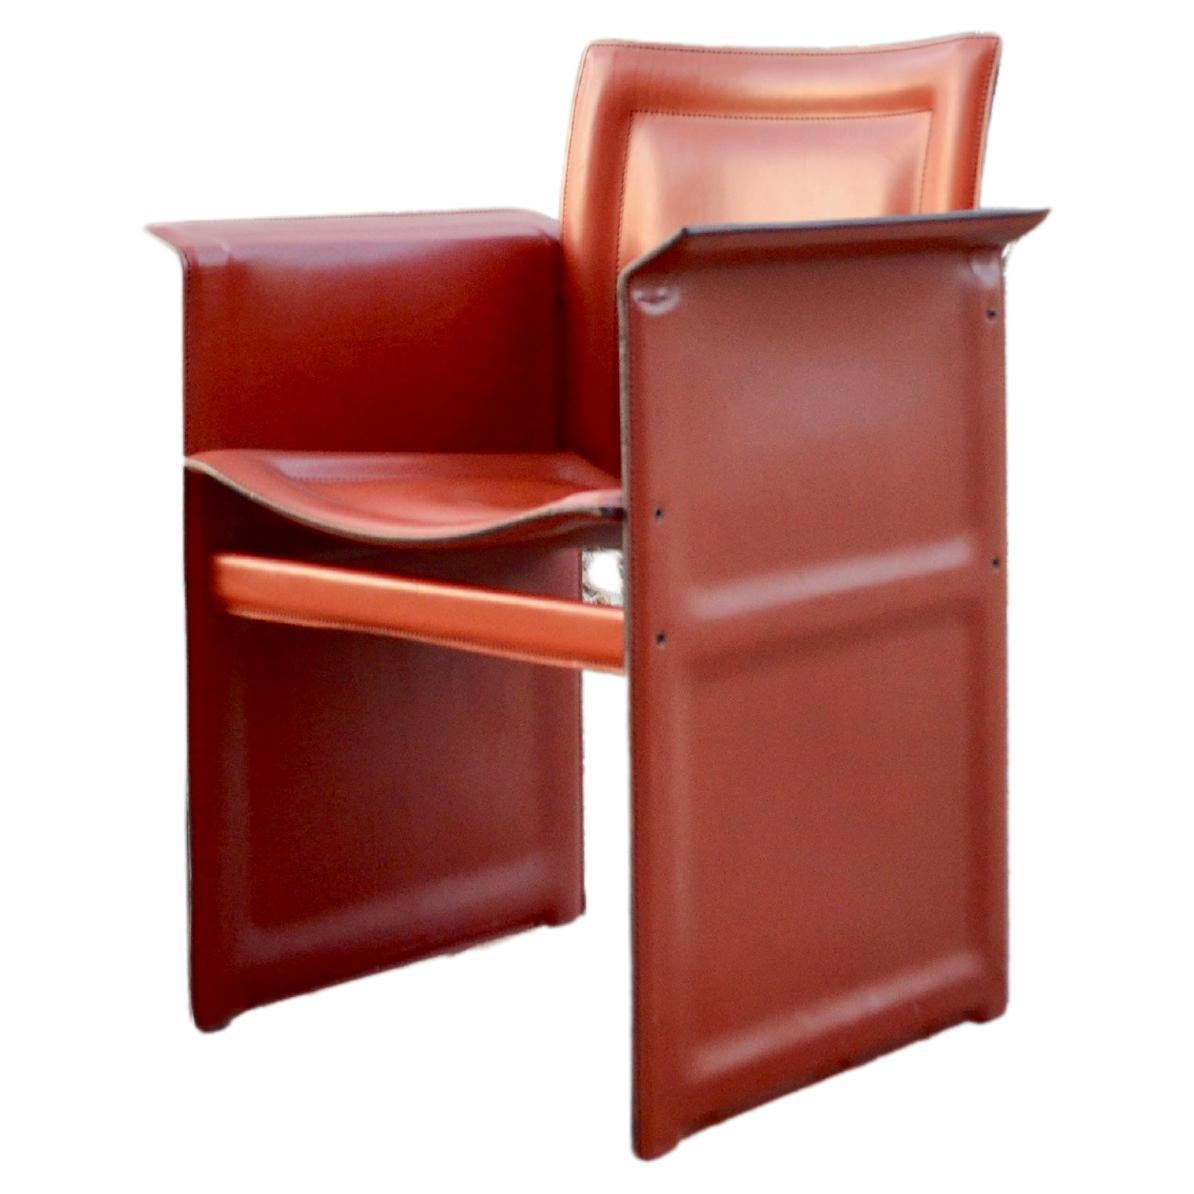 Arrben Italy Modern China Red Saddle Leather Dining Chair Model Solaria